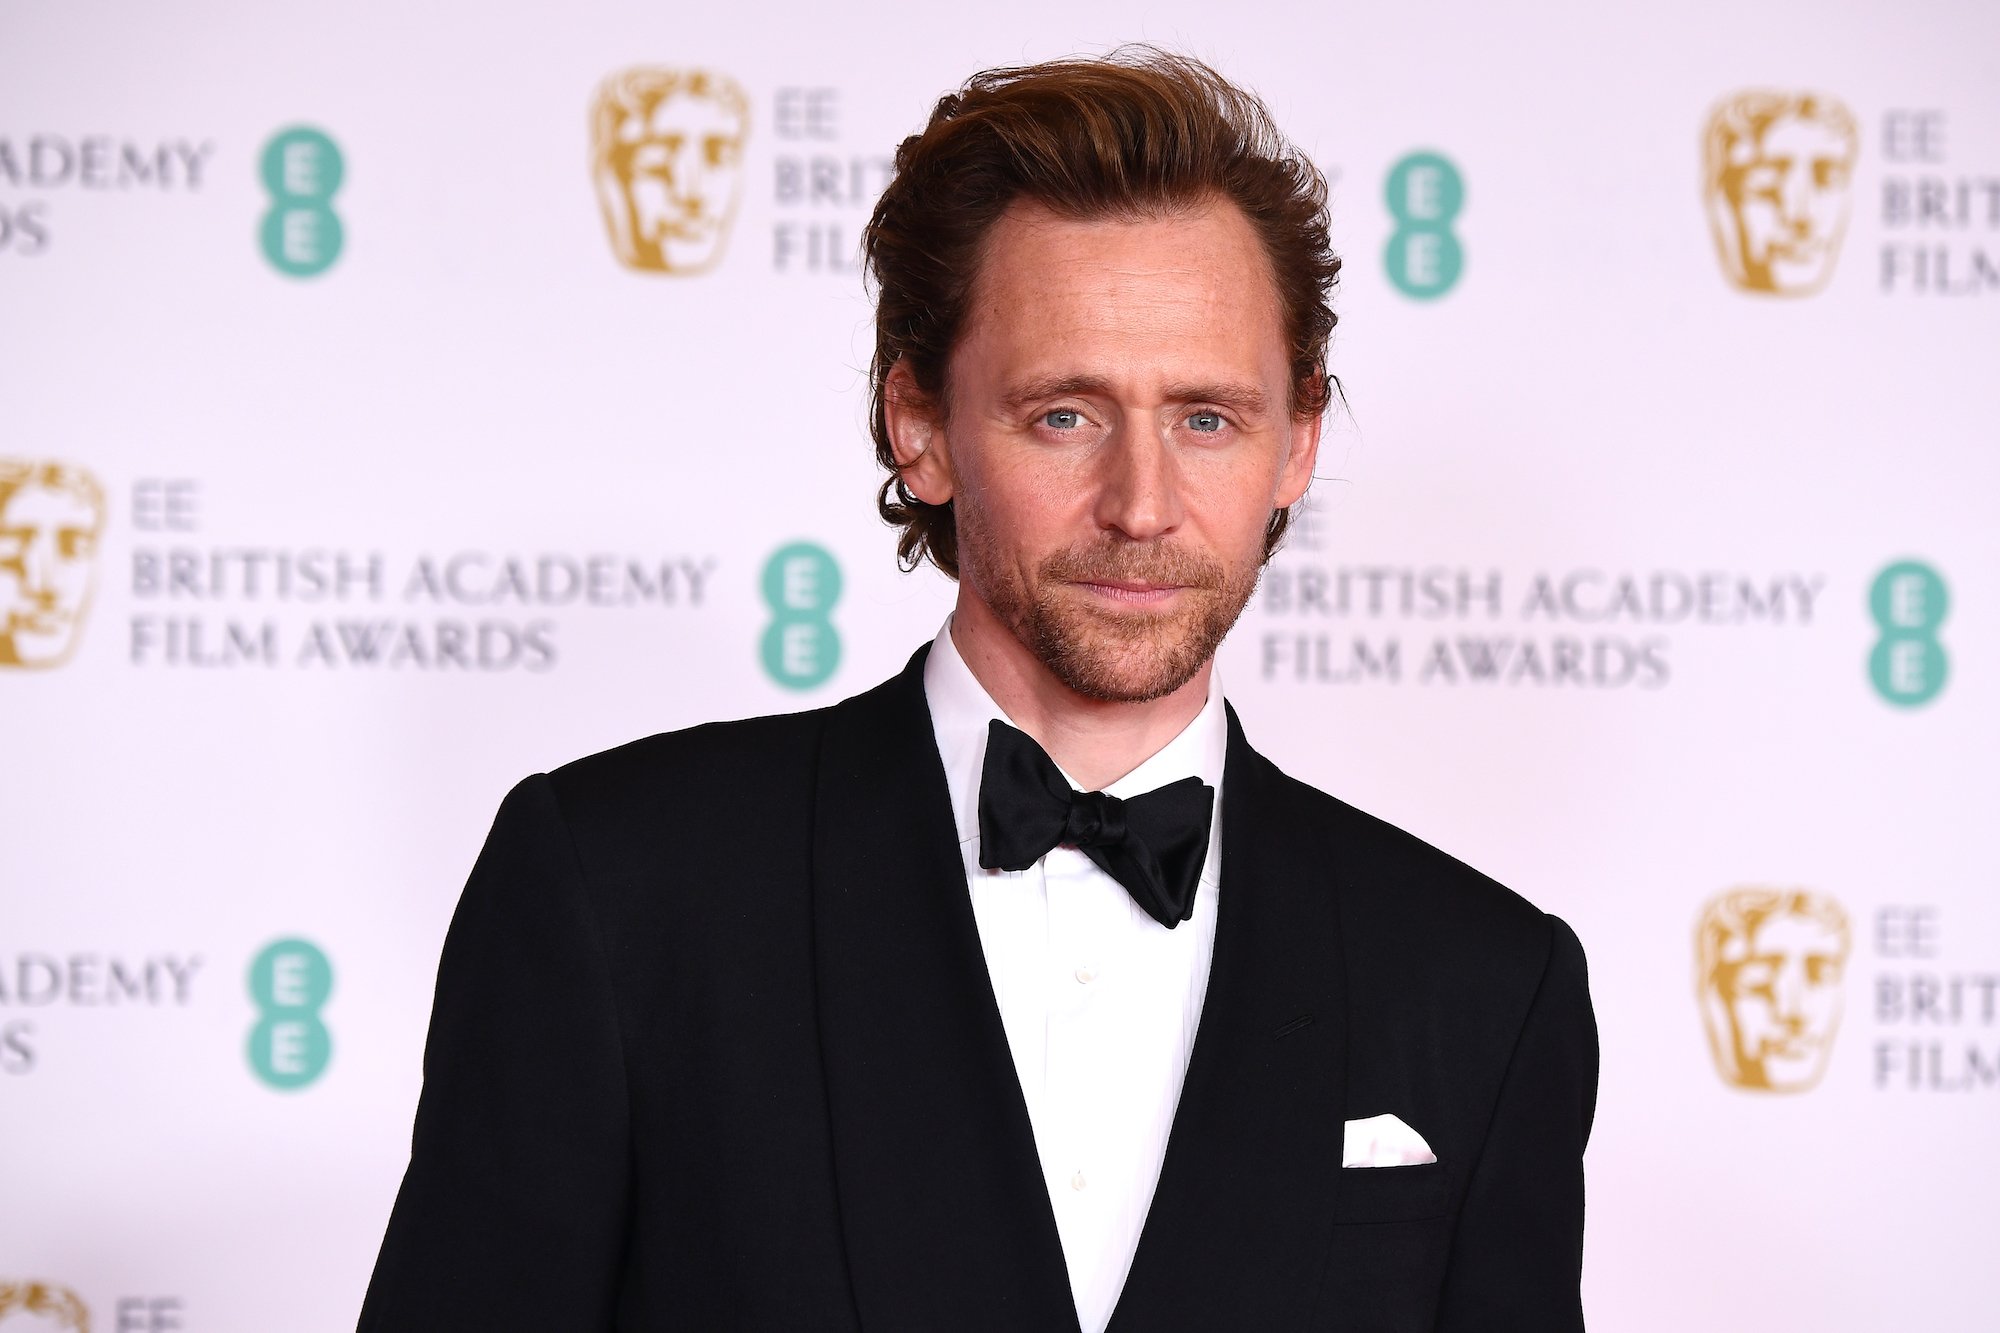 Tom Hiddleston’s ‘The Night Manager’ Leaves These 3 Questions Unanswered